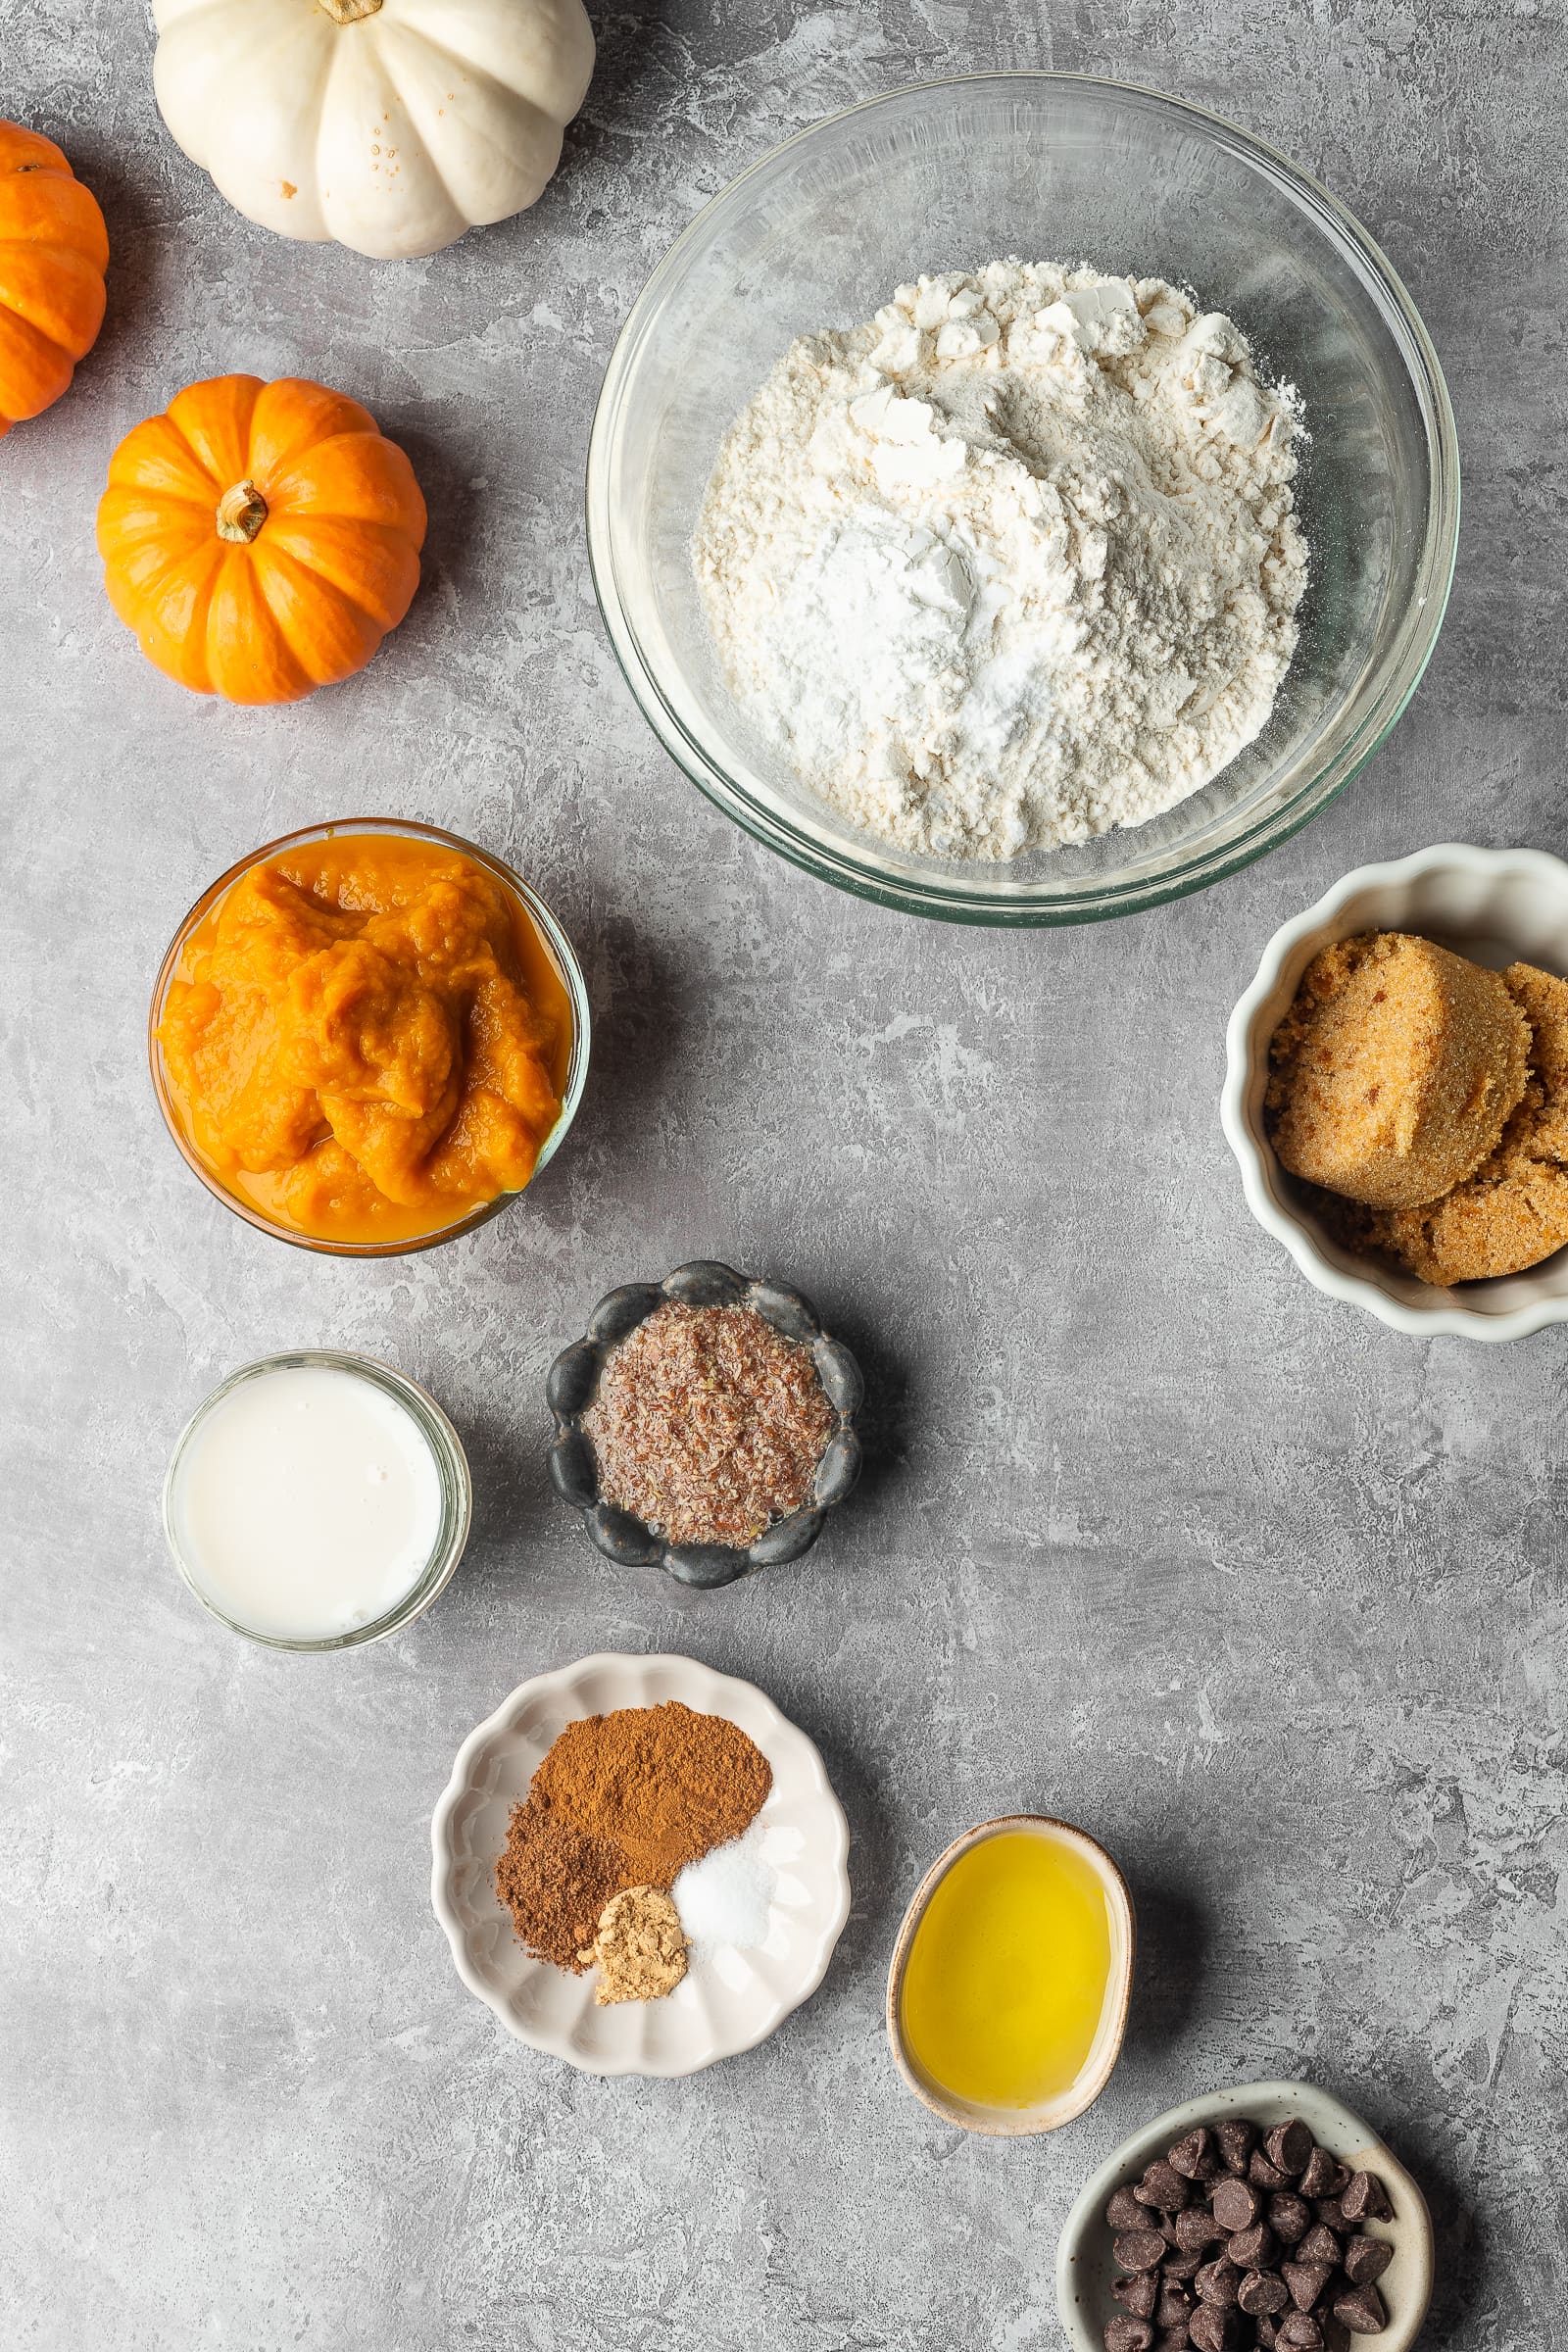 Pumpkin chip bread ingredients on a gray background.